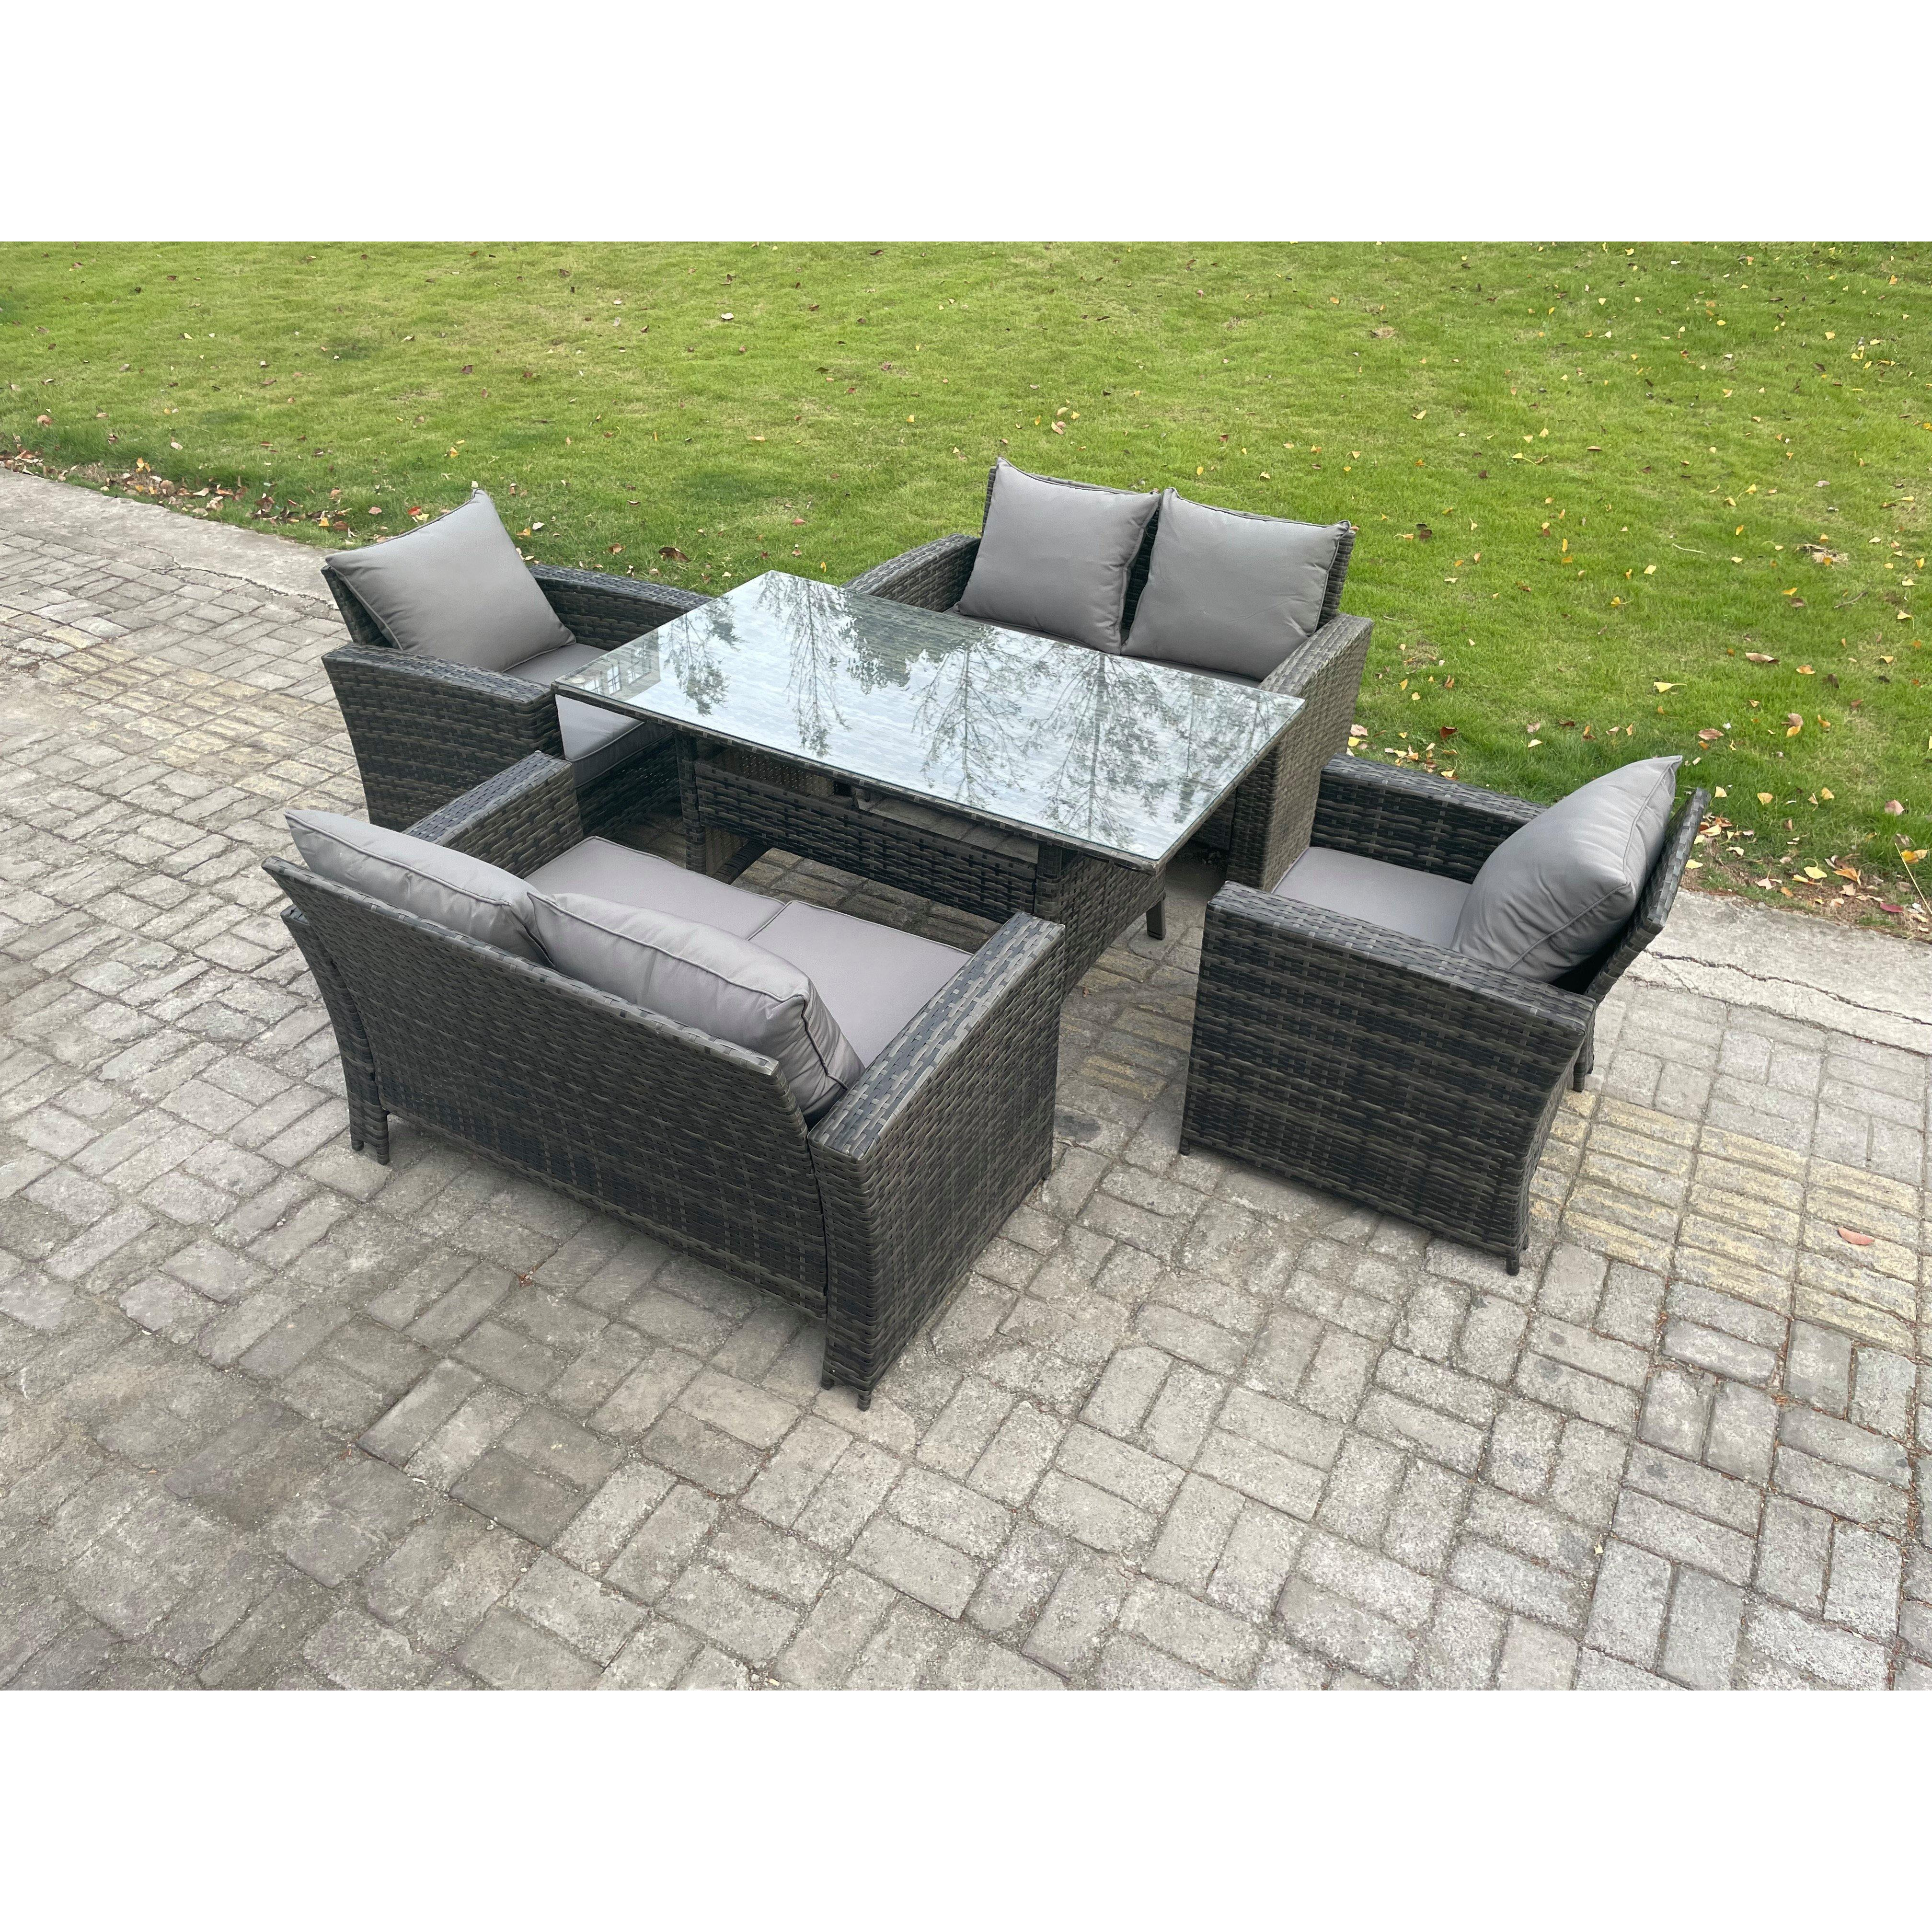 Rattan Garden Furniture Set 6 Seater Patio Outdoor Lounge Sofa Set with Oblong Dining Table Double Seat Sofa Dark Grey - image 1